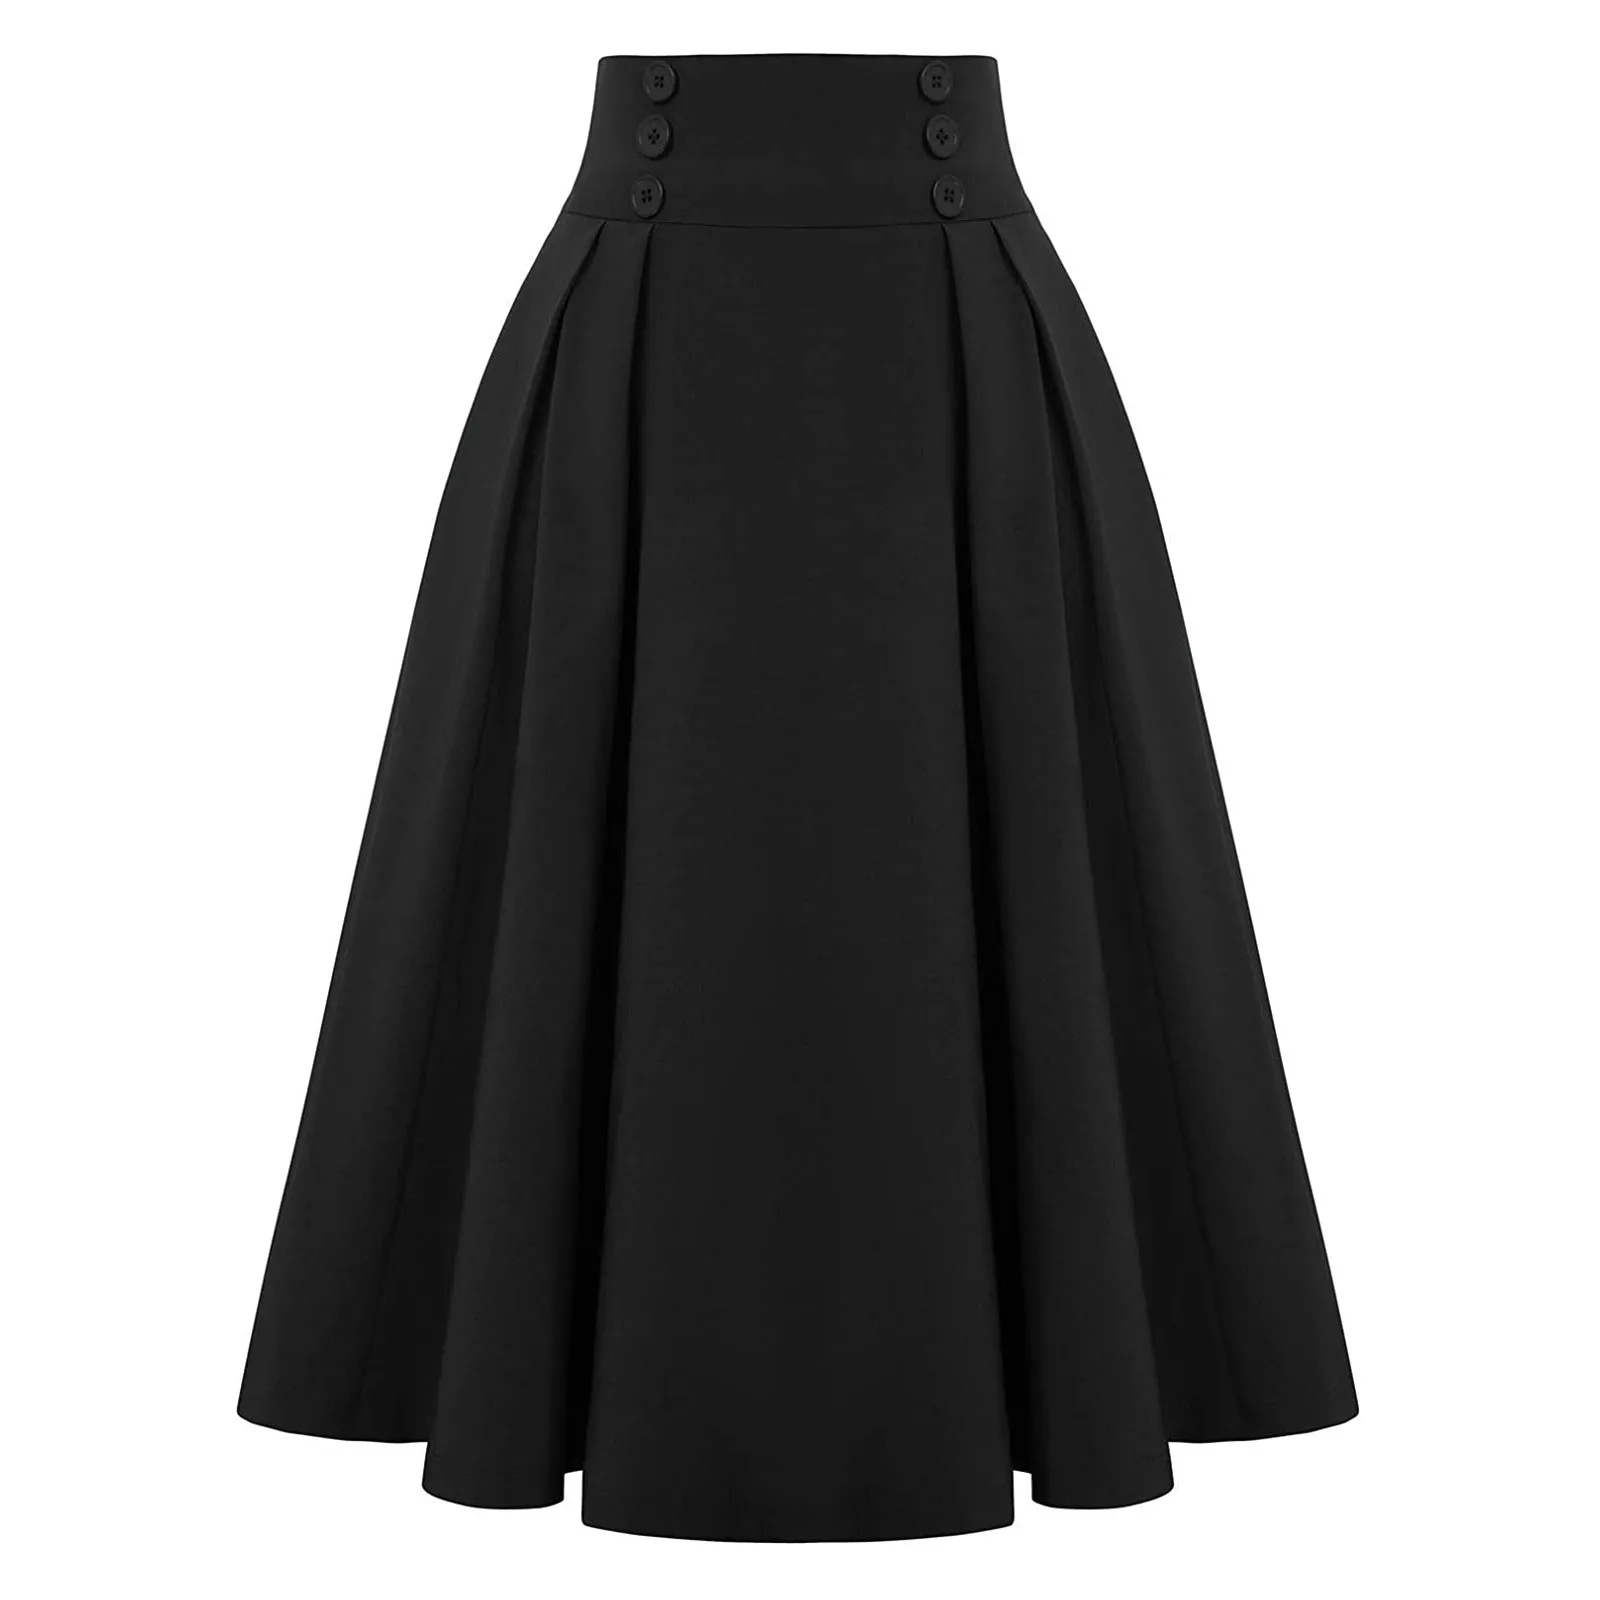 JAYCOSIN 2021 Spring Winter Vintage Skirt Women Casual A- Line Skirt With Pockets Elastic High Waist Long Pleated Skirts Female